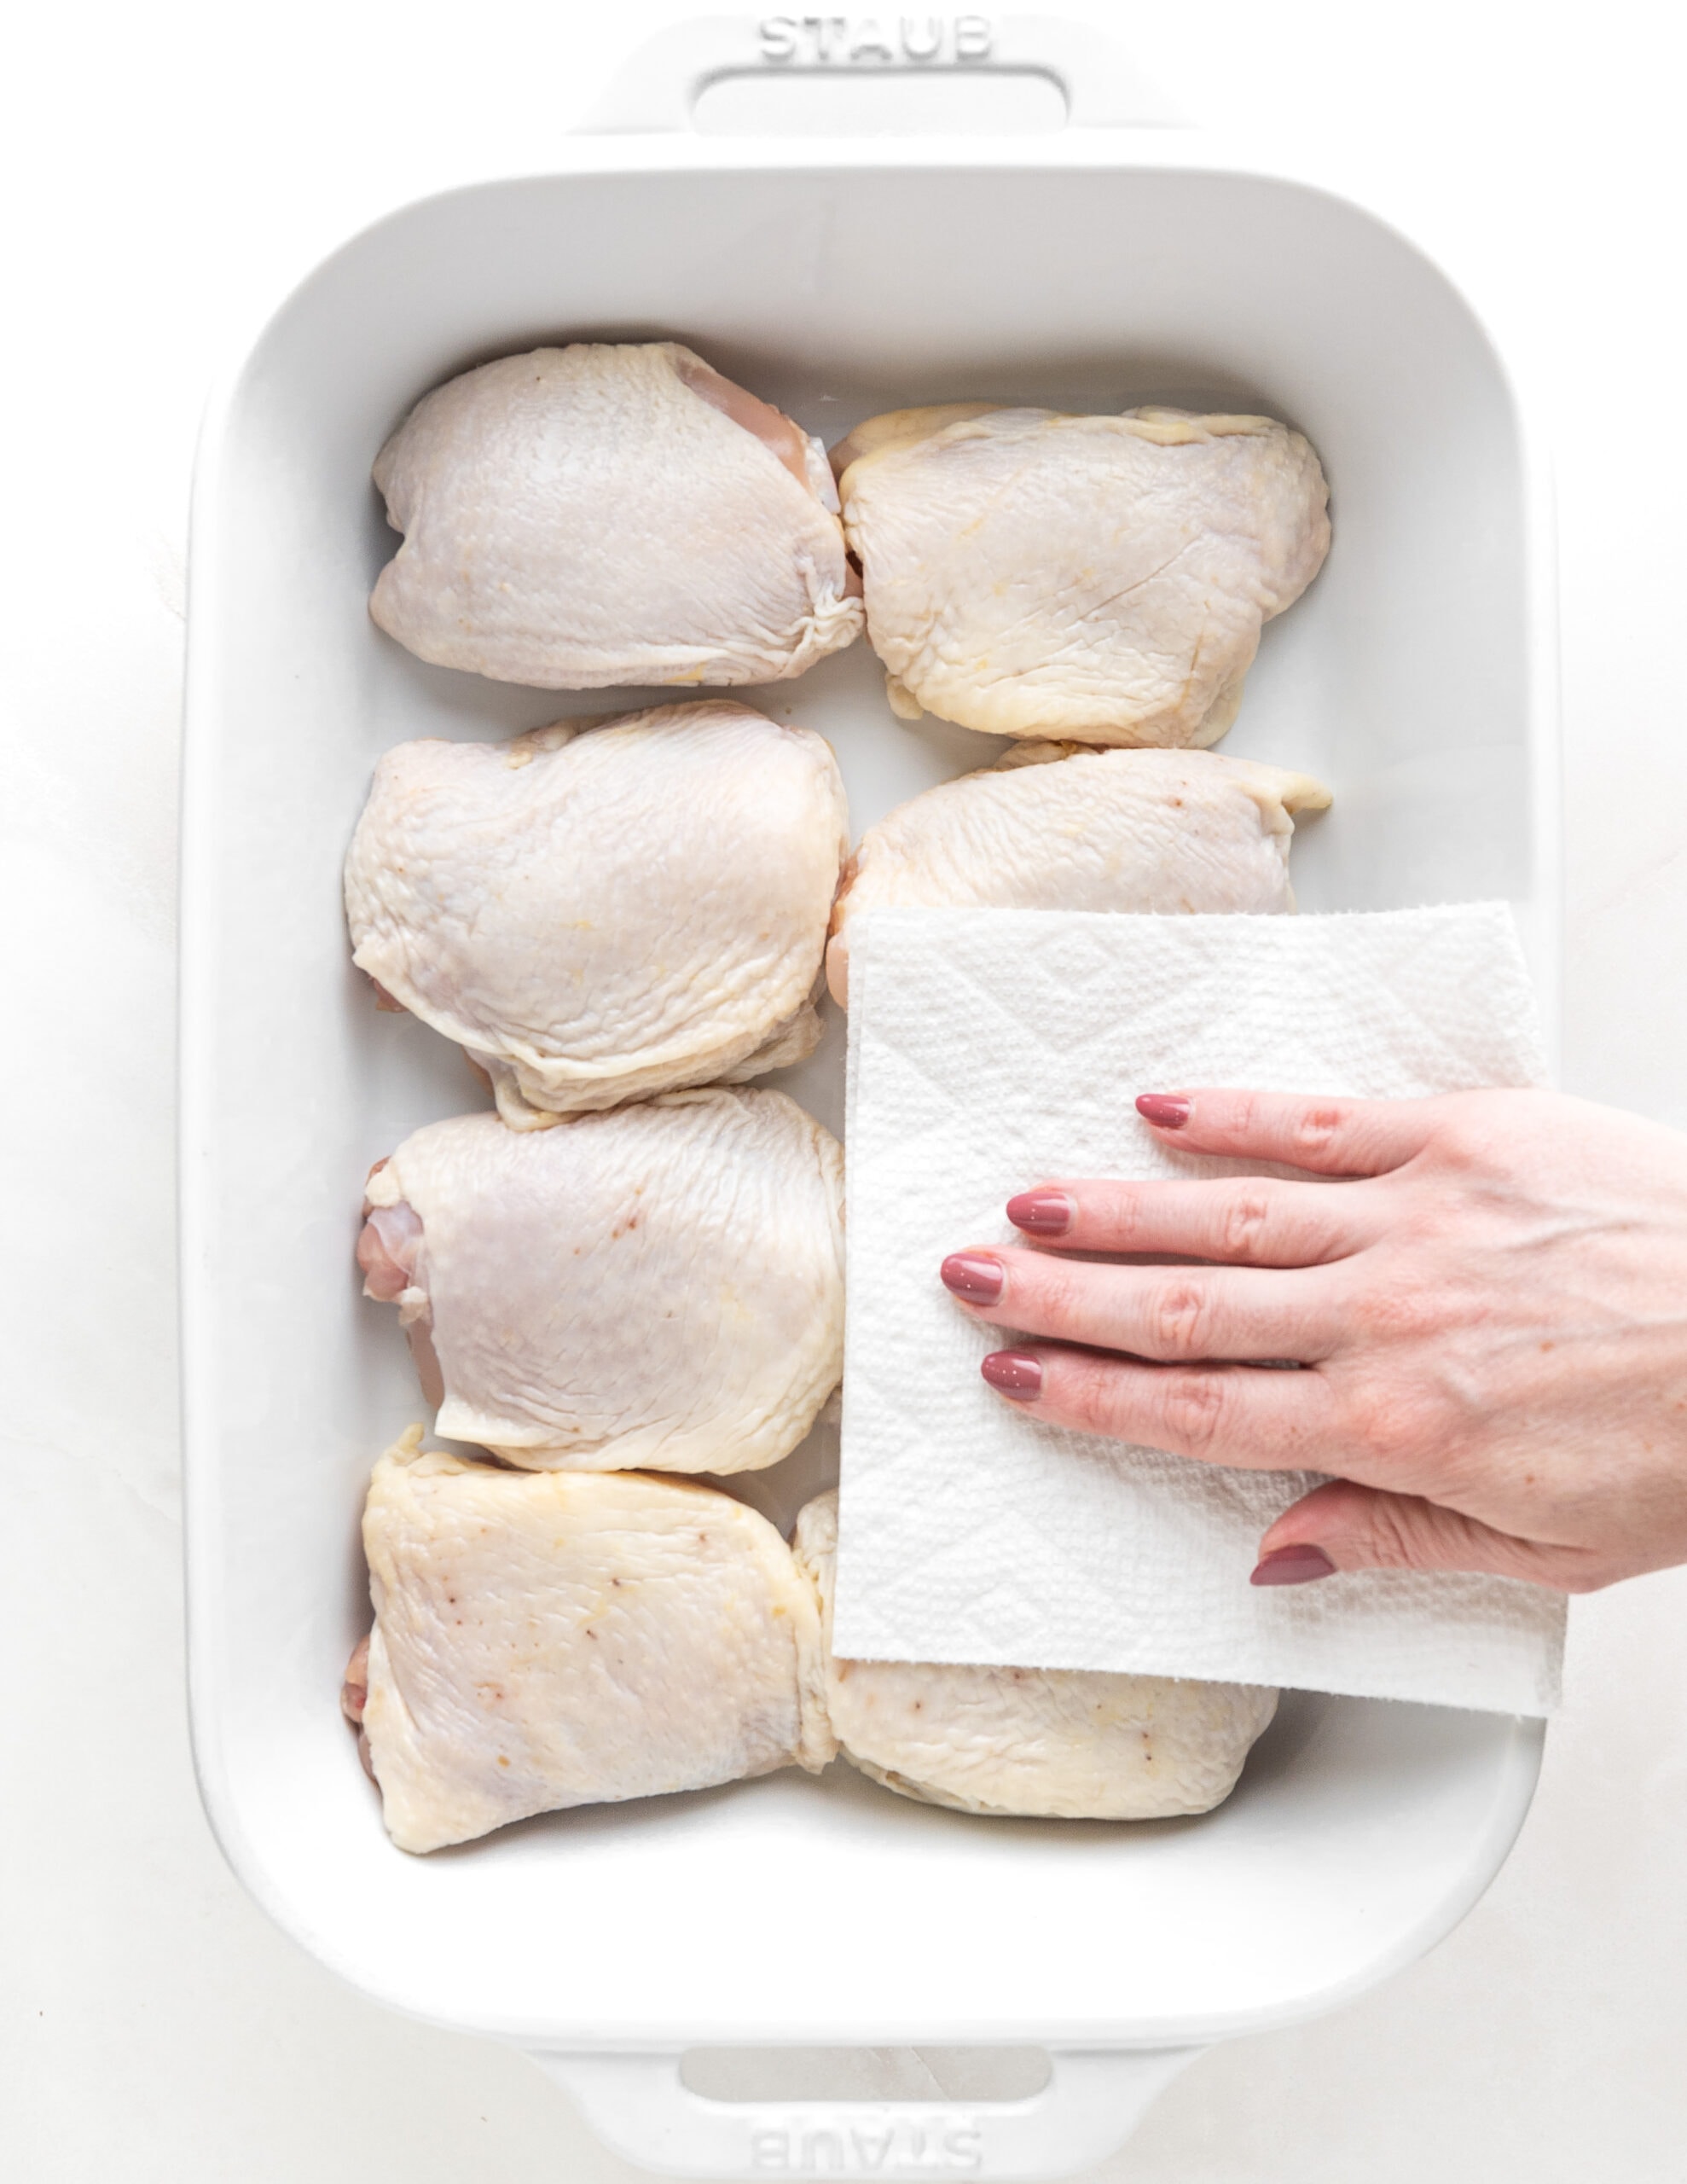 A large white ceramic rectangular baking dish with 8 bone-in chicken thighs, and a hand off to the side drying the chicken with a paper towel. 